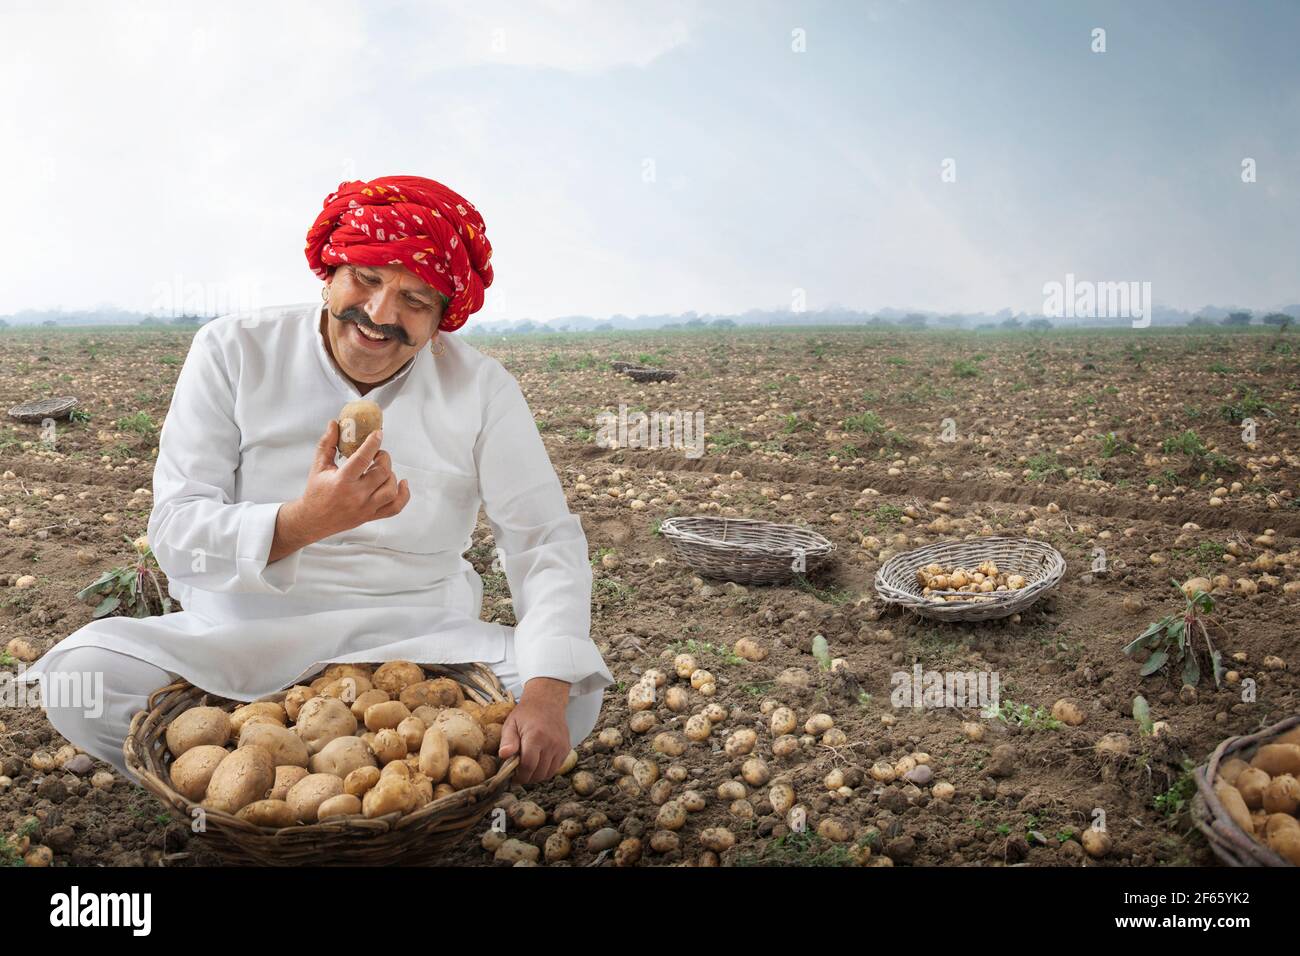 Indian Man harvesting potatoes with basket in his field Stock Photo